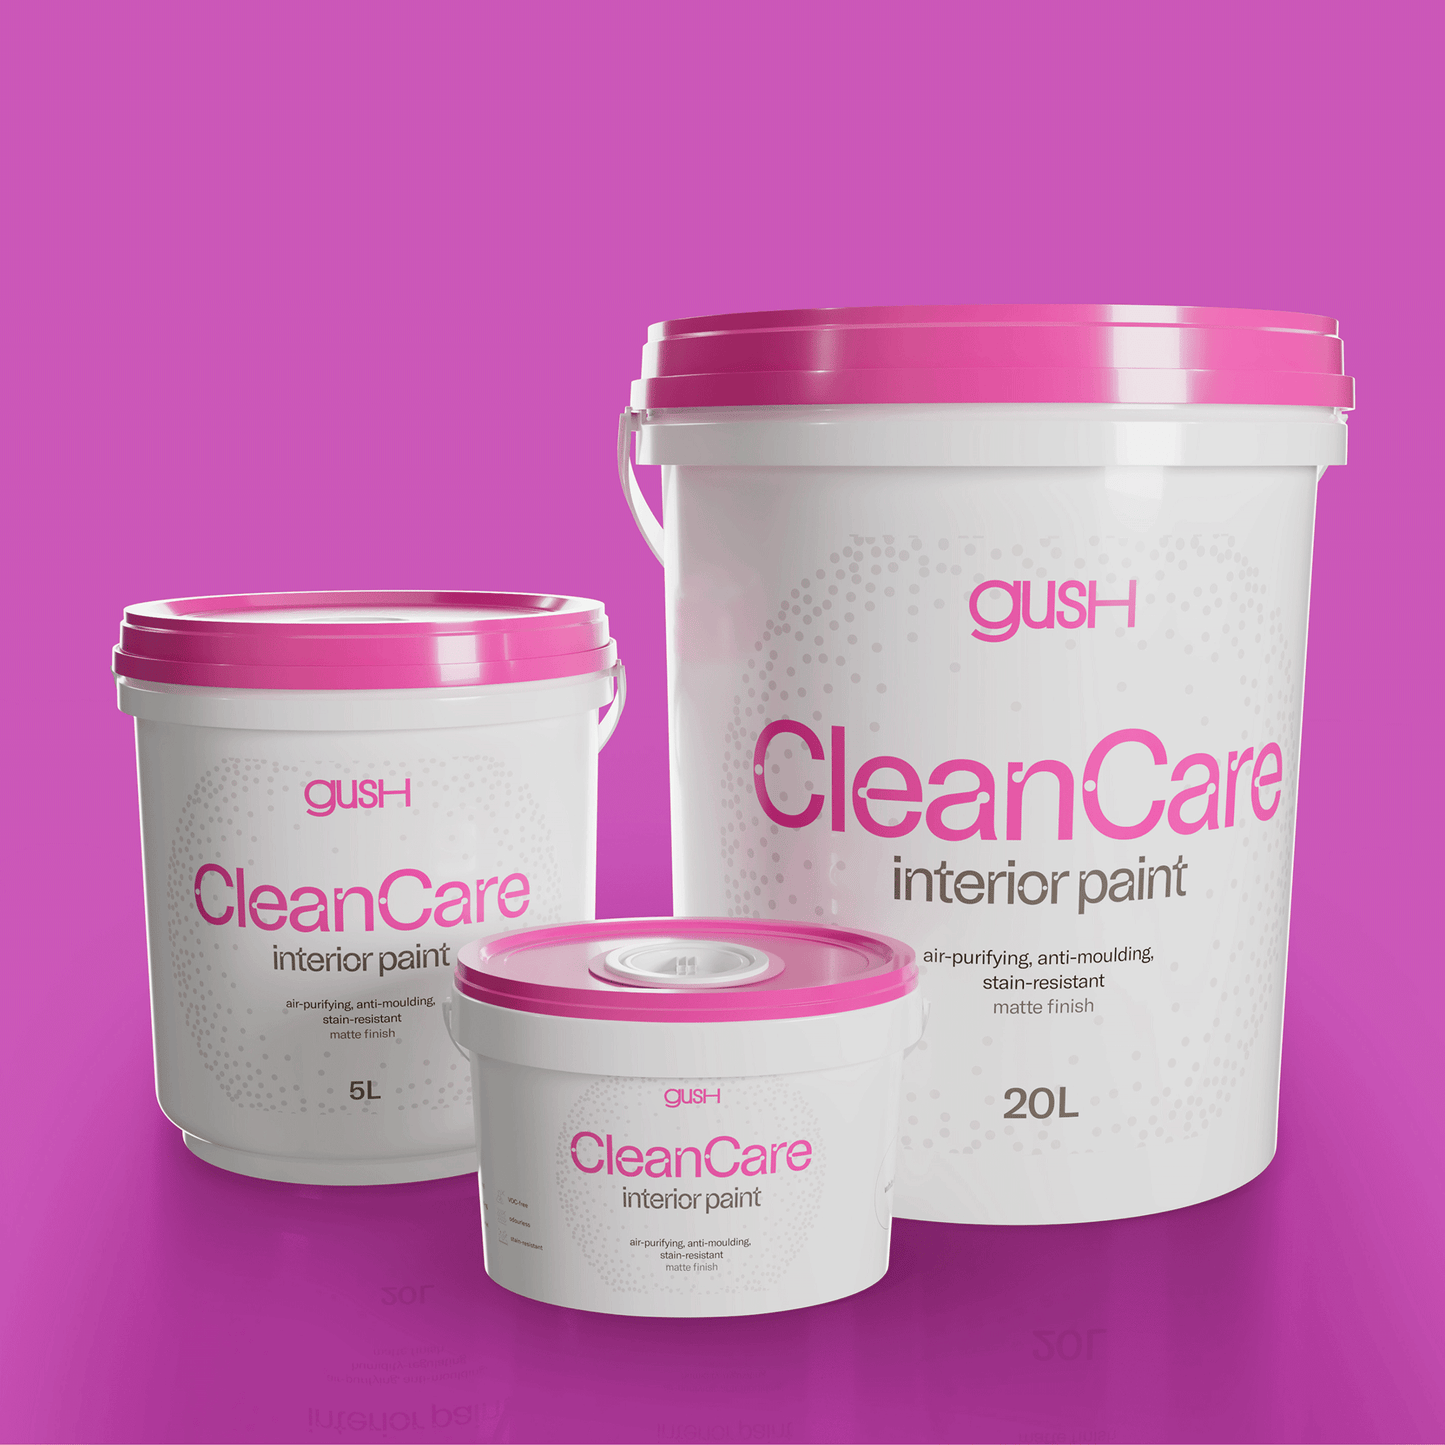 Gush Clean Care Interior Paint - All Sizes